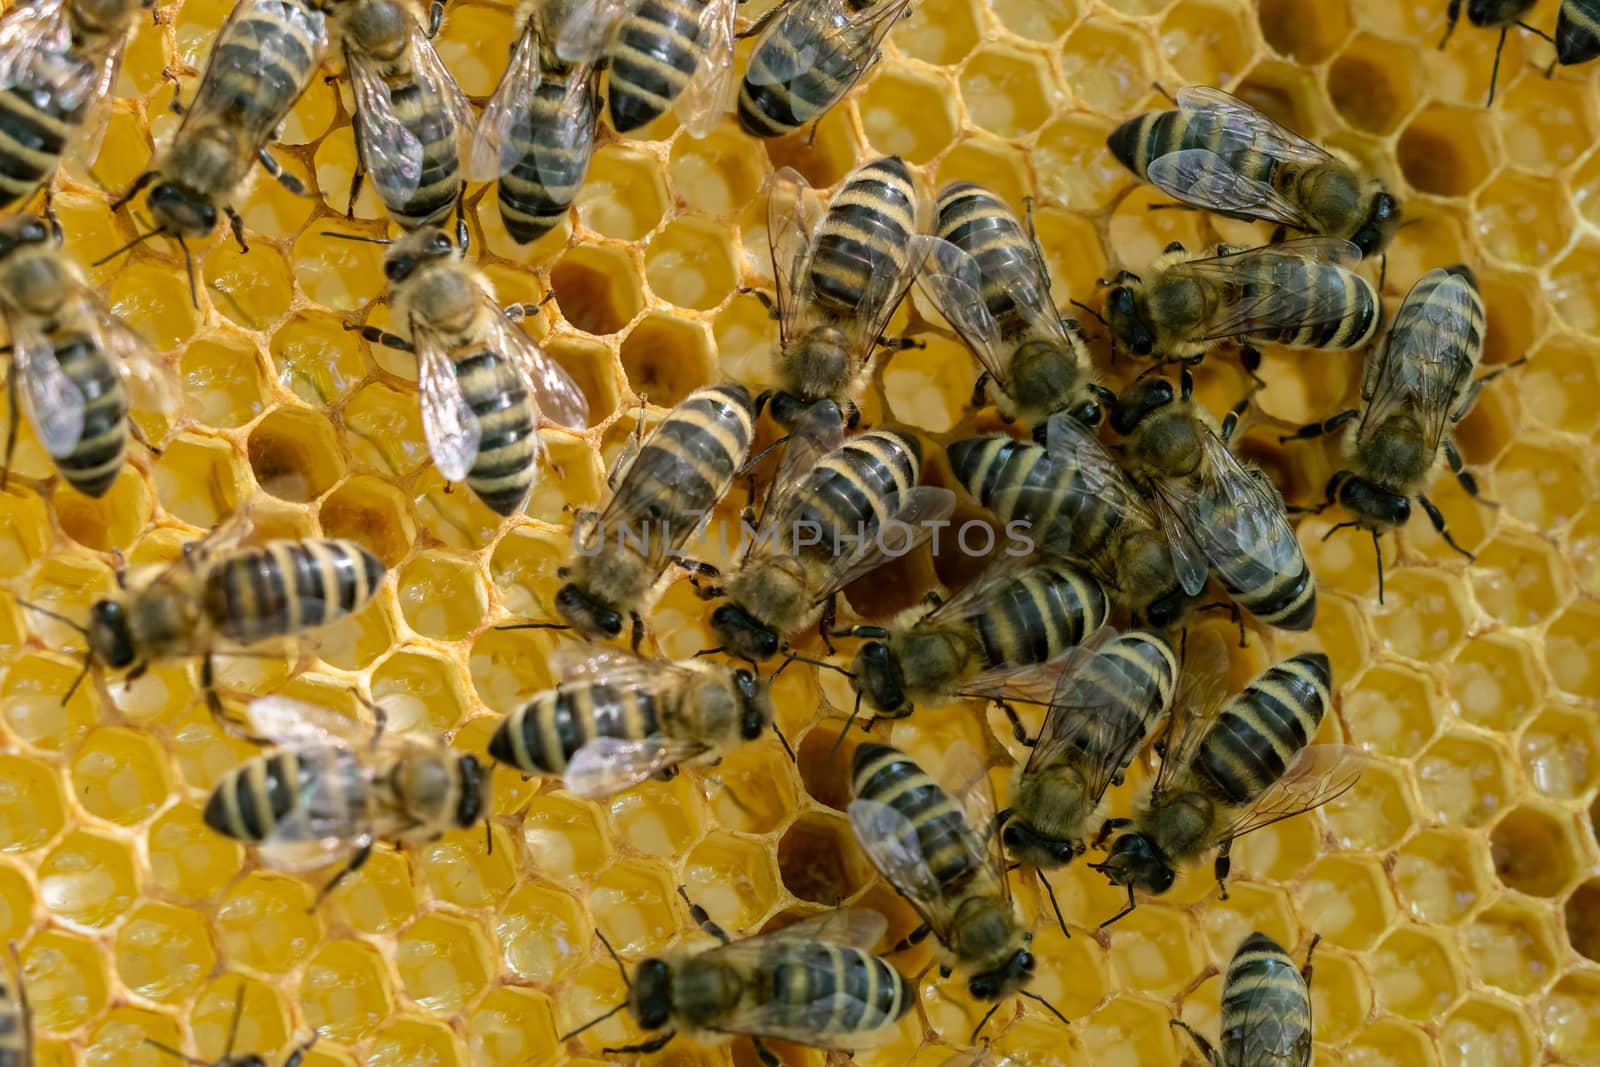 Honeycomb full of bees. Beekeeping concept. Bees in honeycomb.